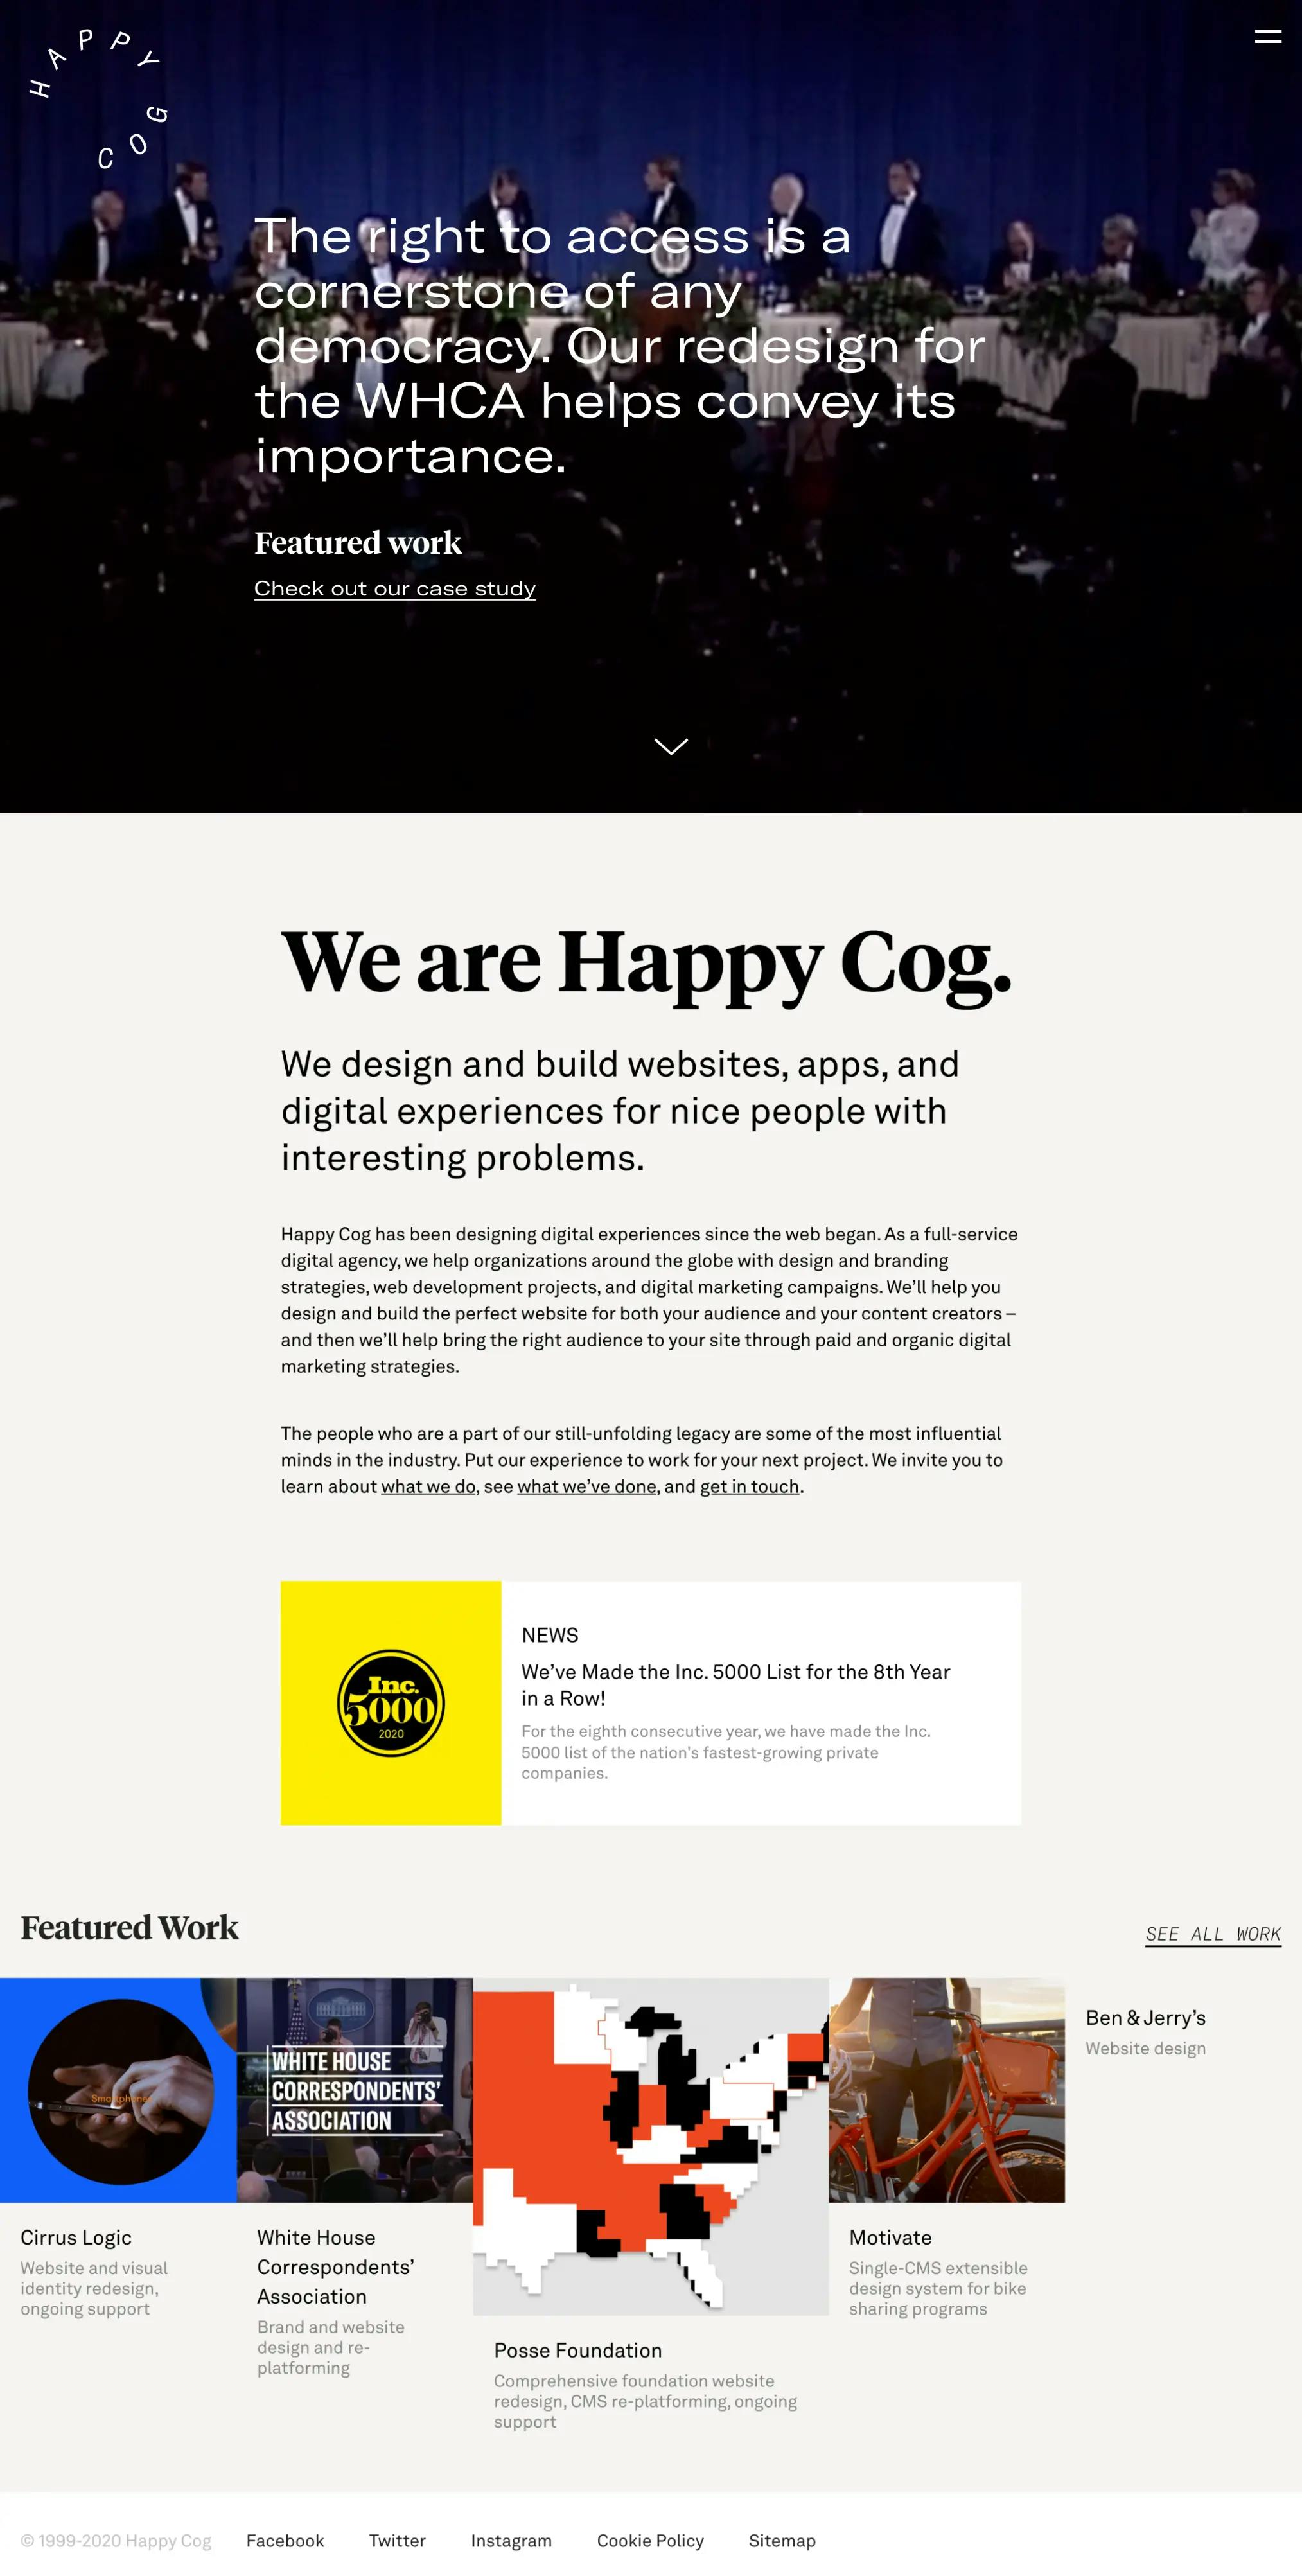 Screenshot of the desktop view of the Happy Cog's homepage with a featured project